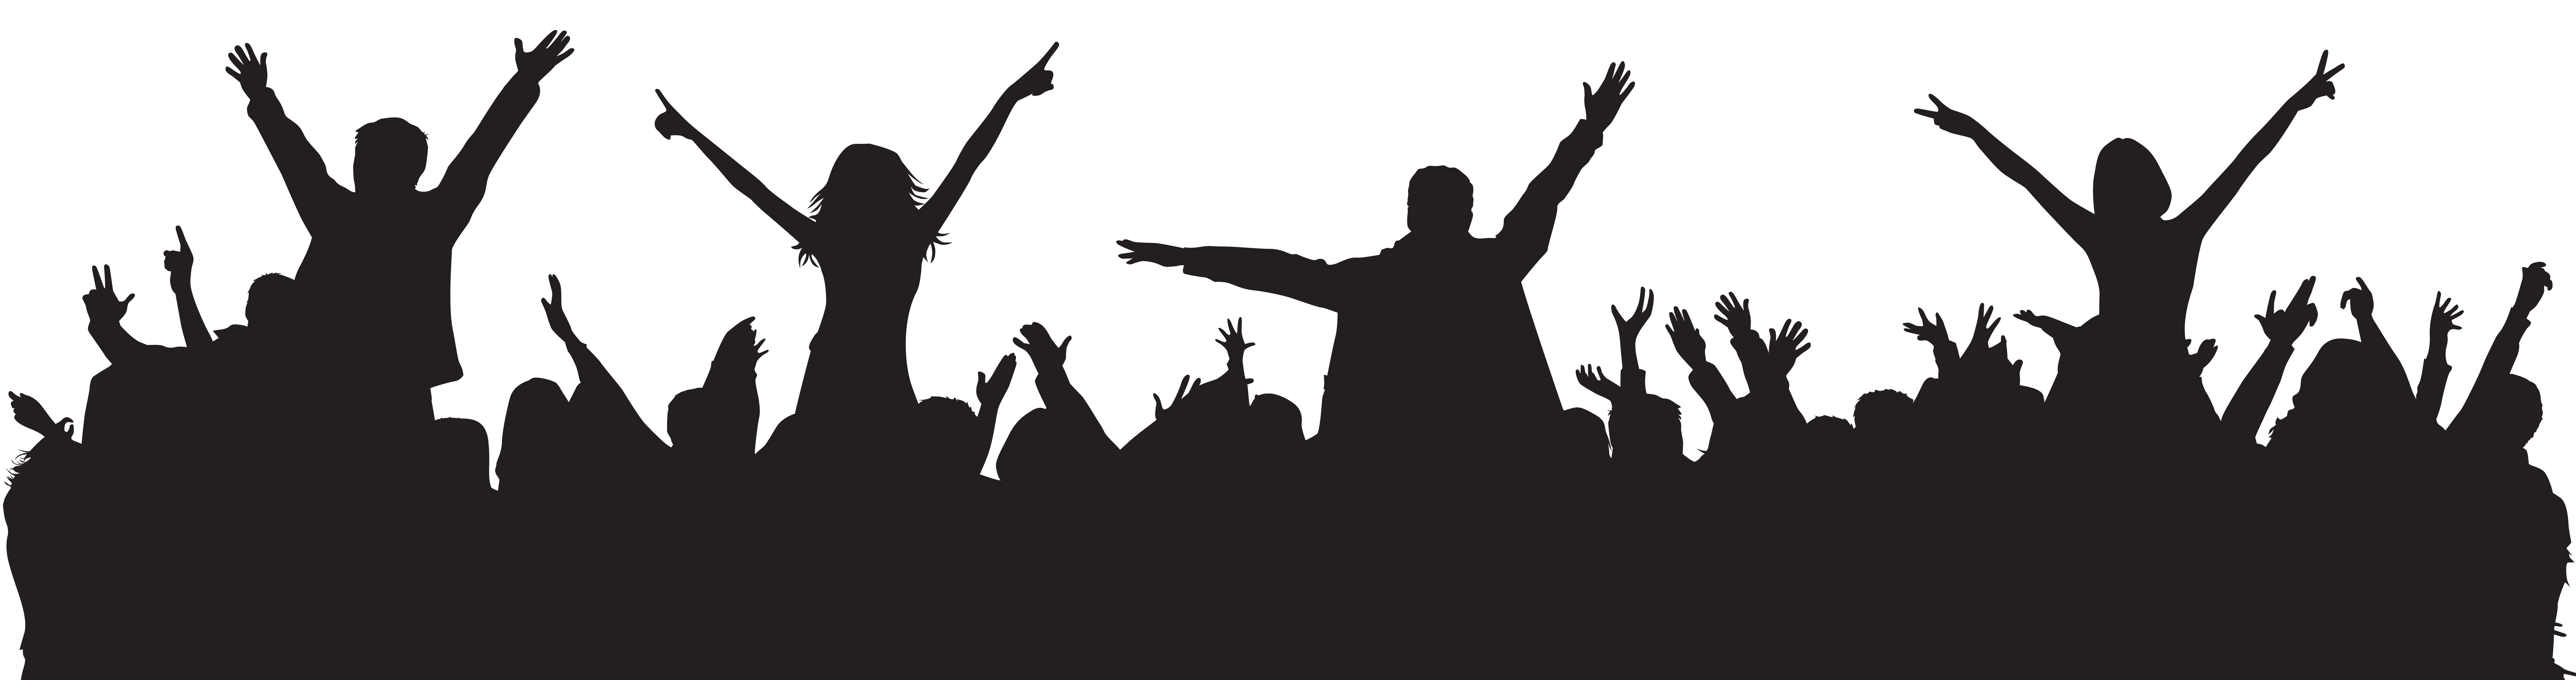 Party people silhouette png. Person clipart celebration